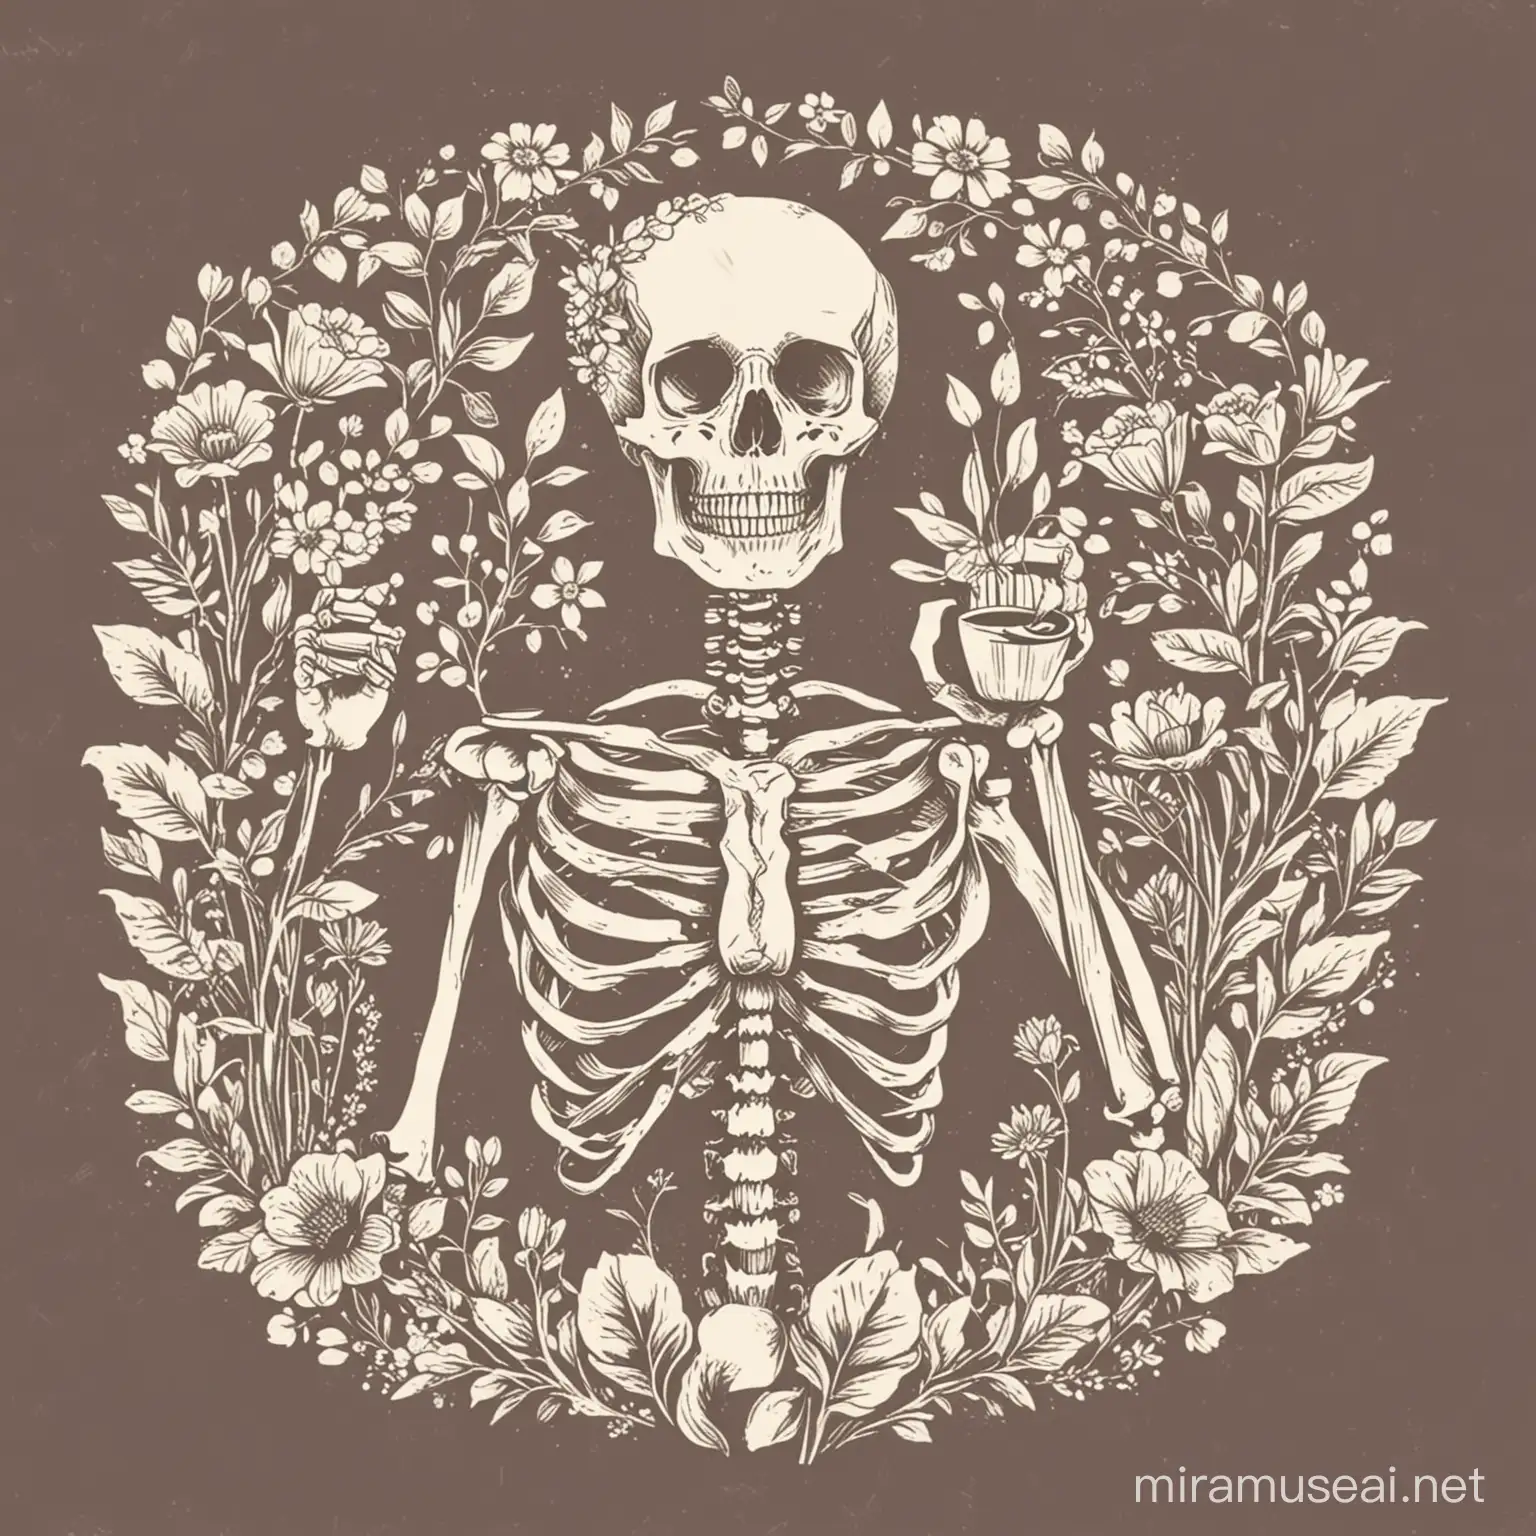 stencils, simple, minimalism, vector art, sketch, flat, 2d, vintage style, human skeleton holding a cup of coffee, surrounded by some flowers, close-up